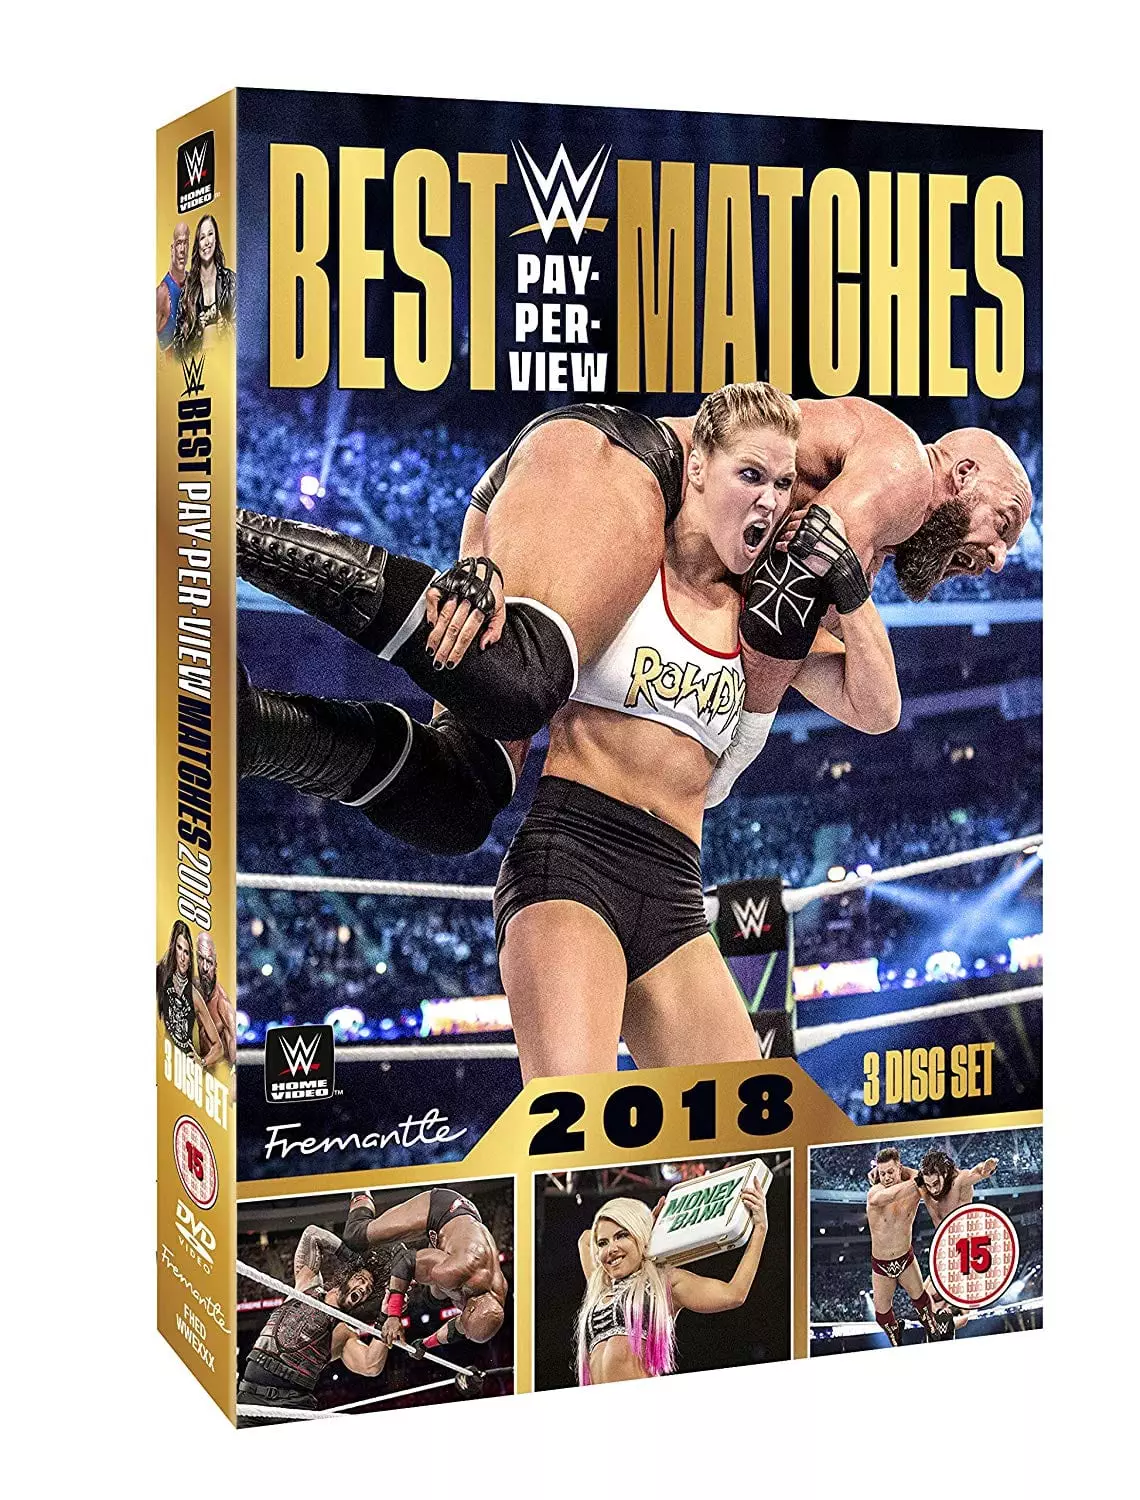 WWE Best PayPerView Matches 2018 comes to DVD in January